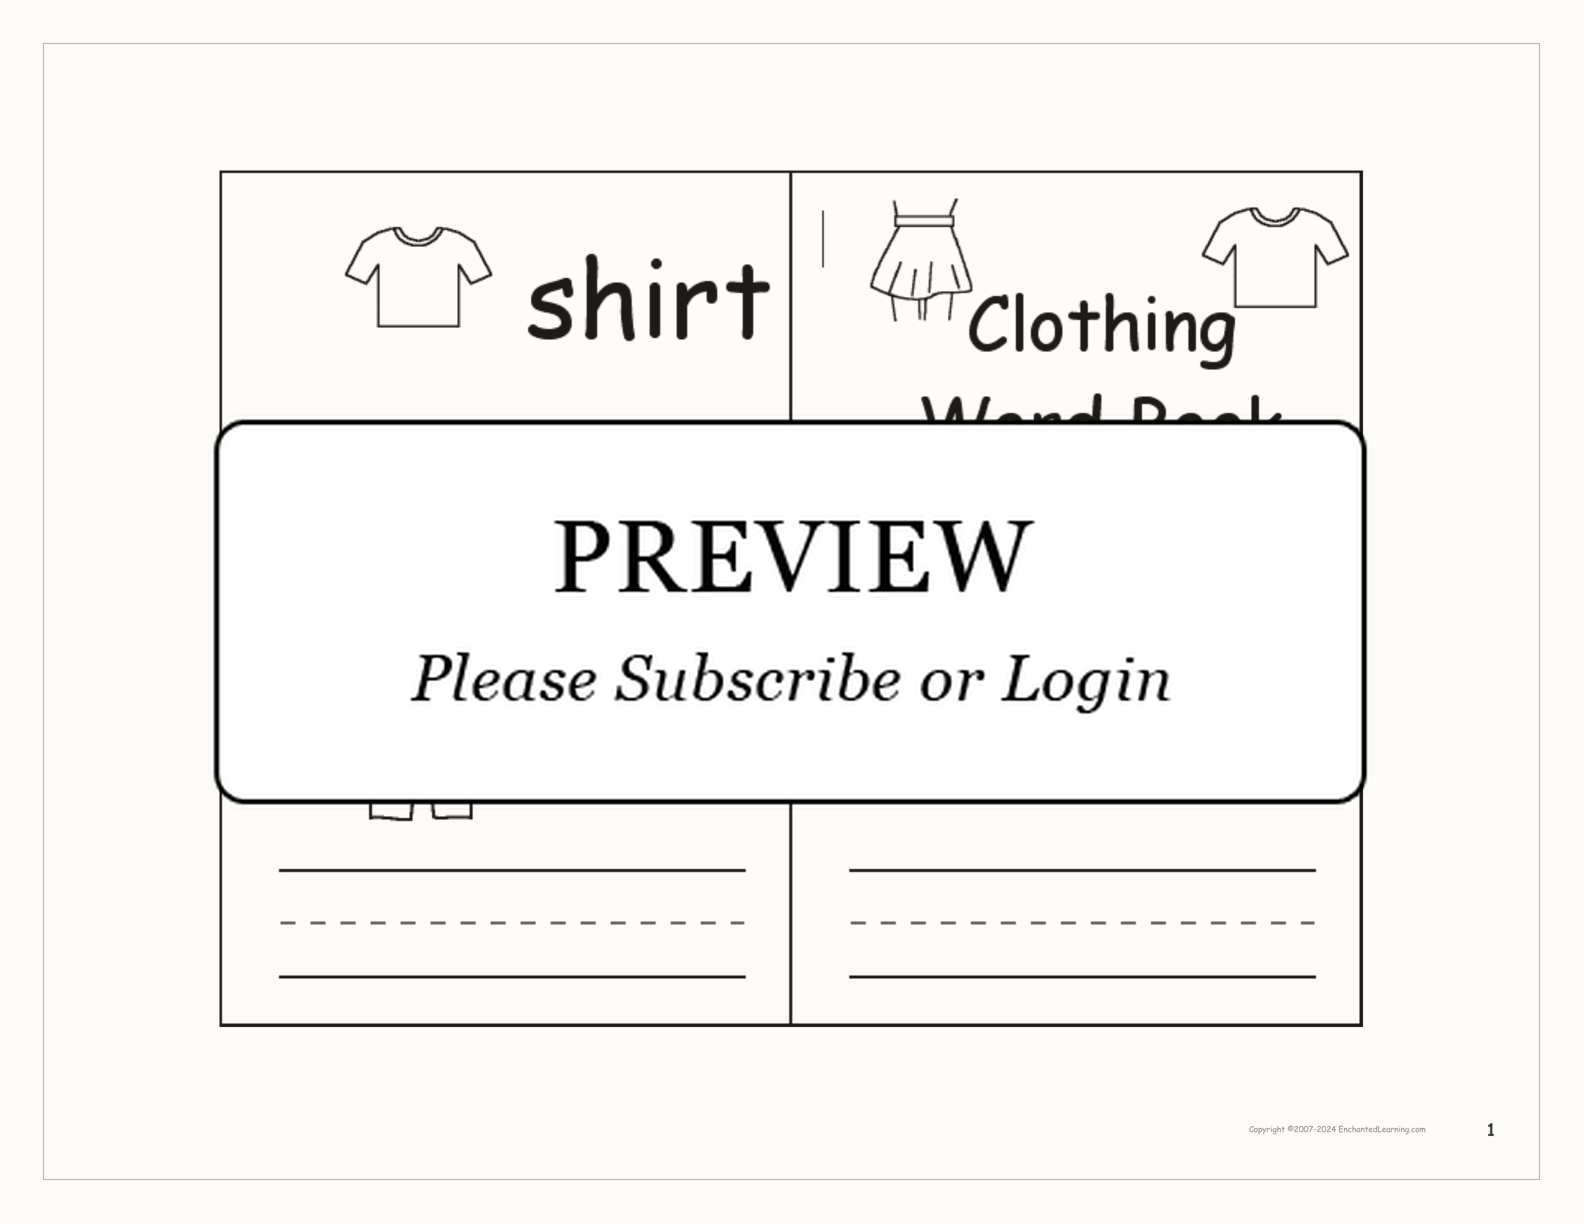 Clothing Word Book interactive printout page 1